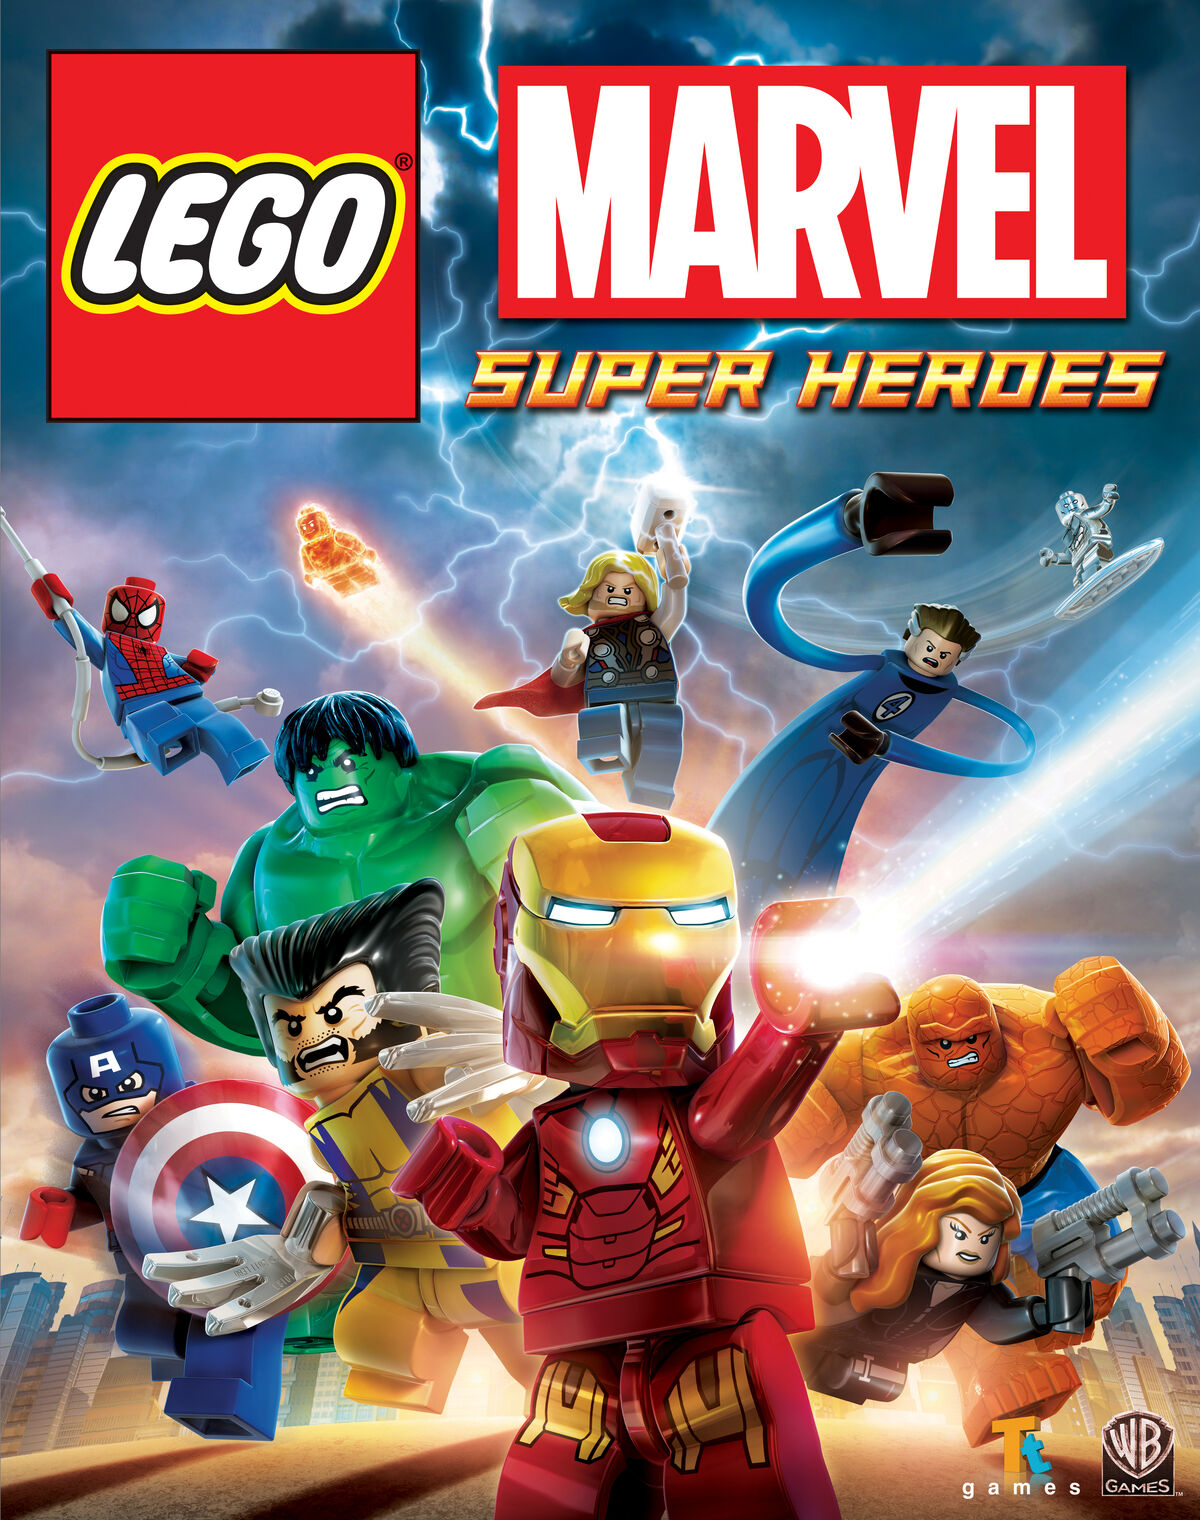 LEGO Marvel Super Heroes 3 Should Finally Fly The Nest